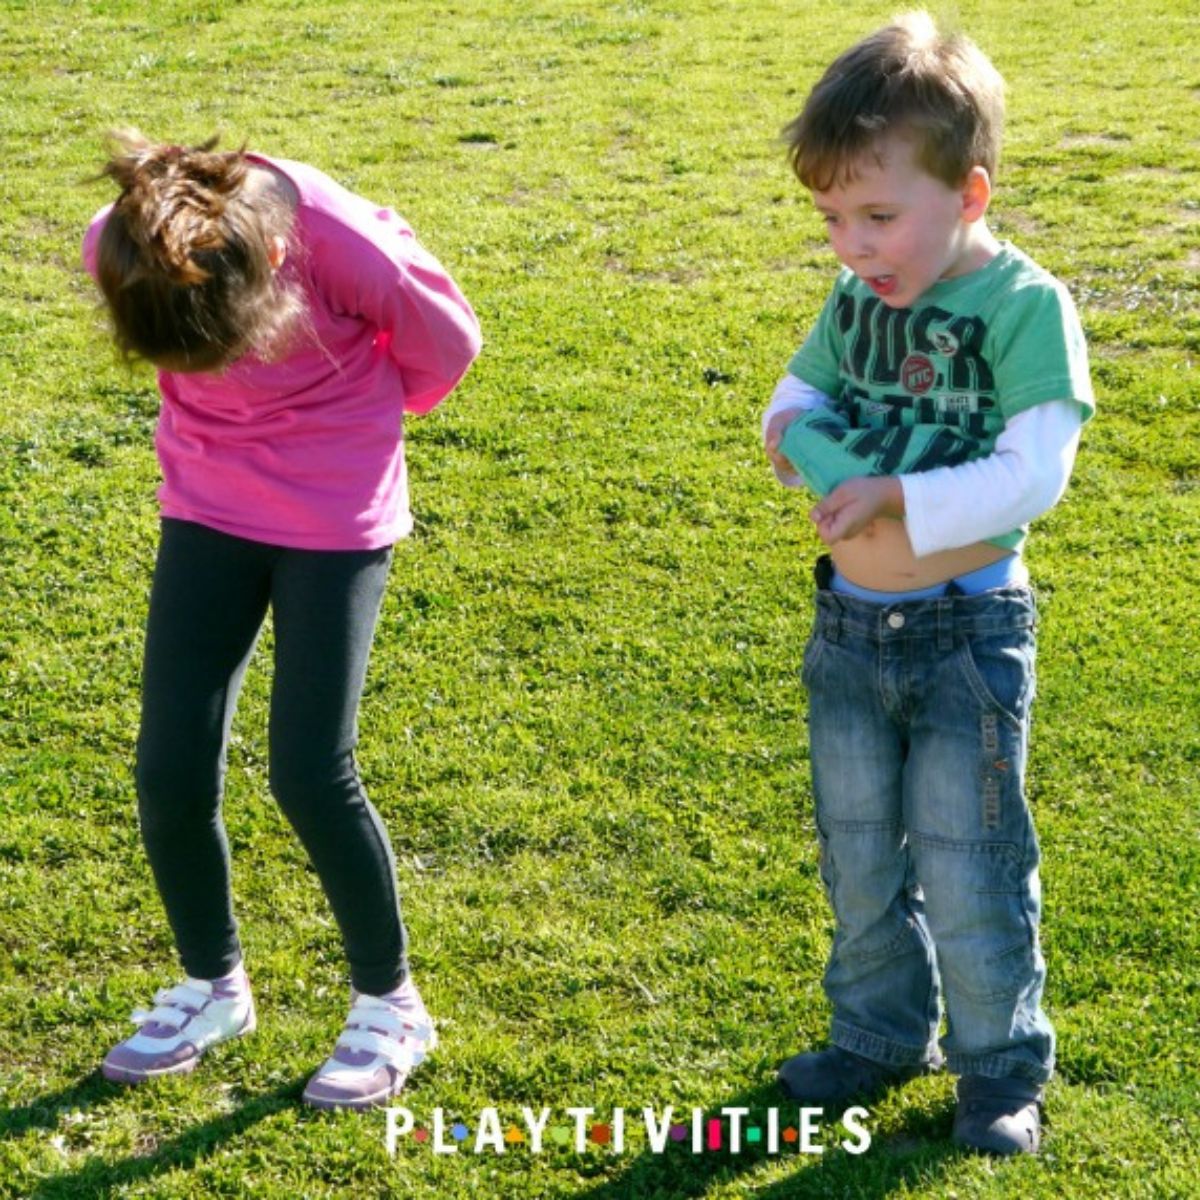 Boy in a green t-shirt and girl in a pink t-shirt playing outside.